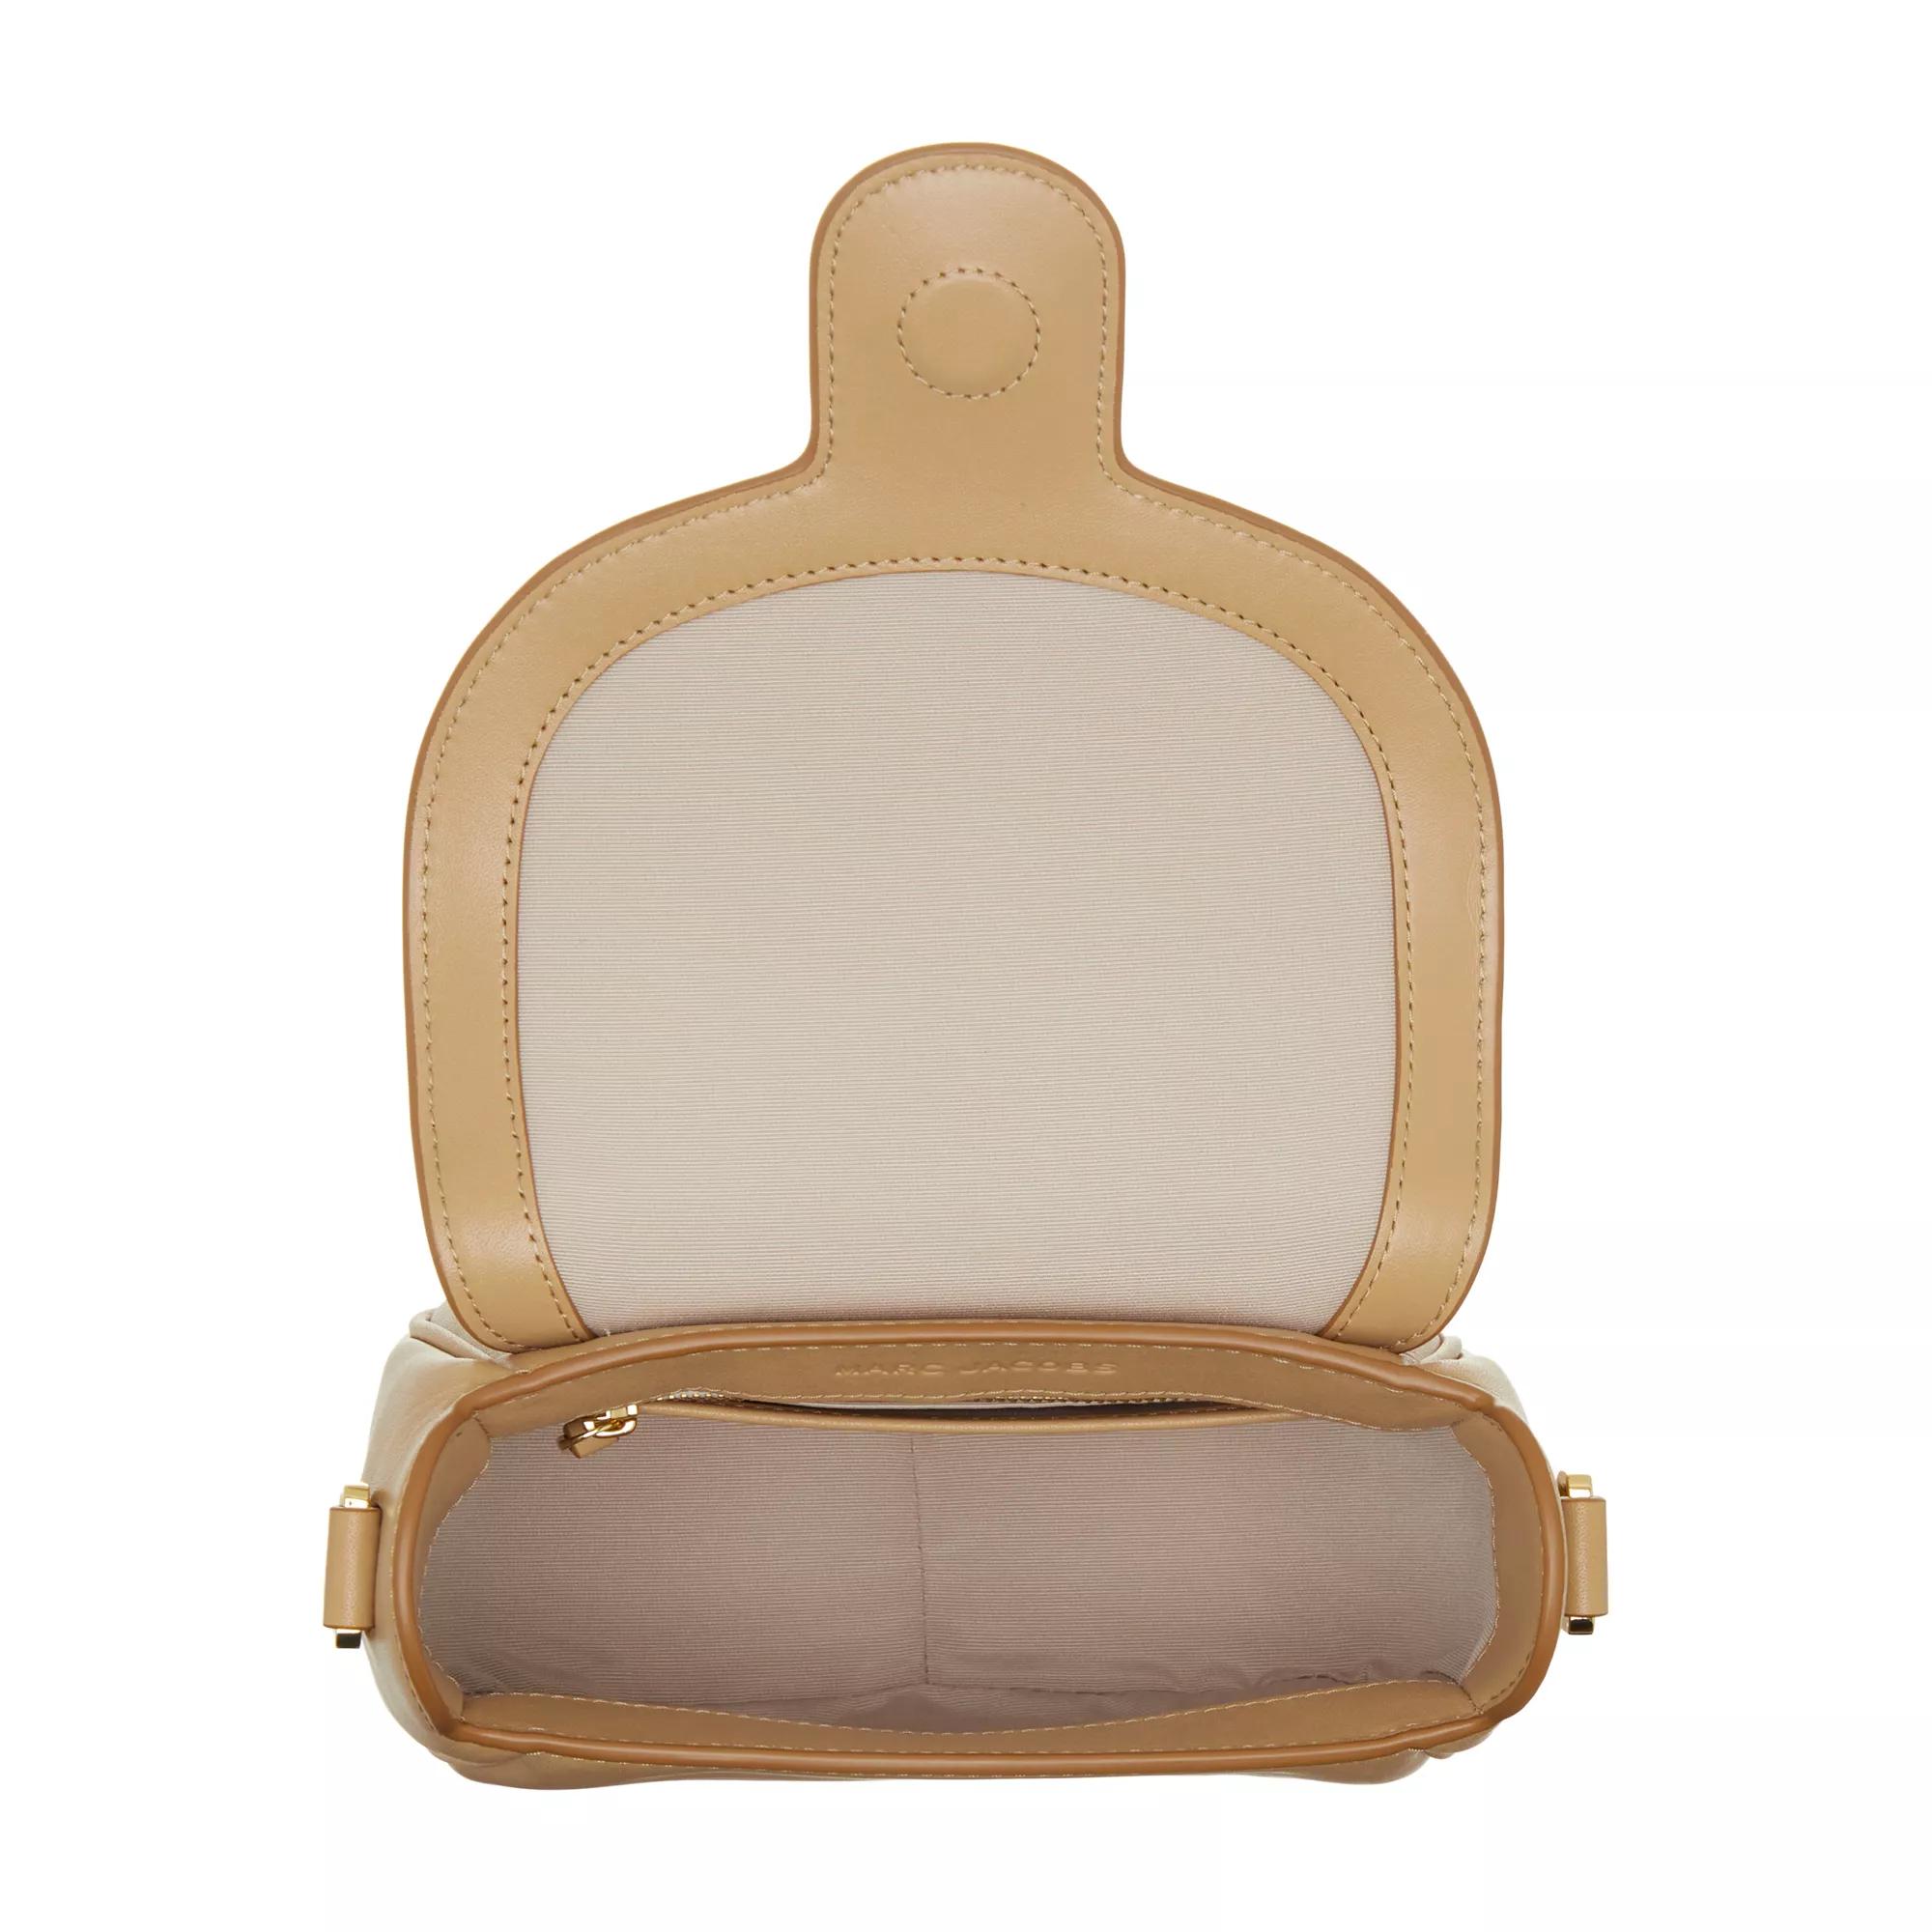 Marc Jacobs Crossbody bags The Small Saddle Bag in beige